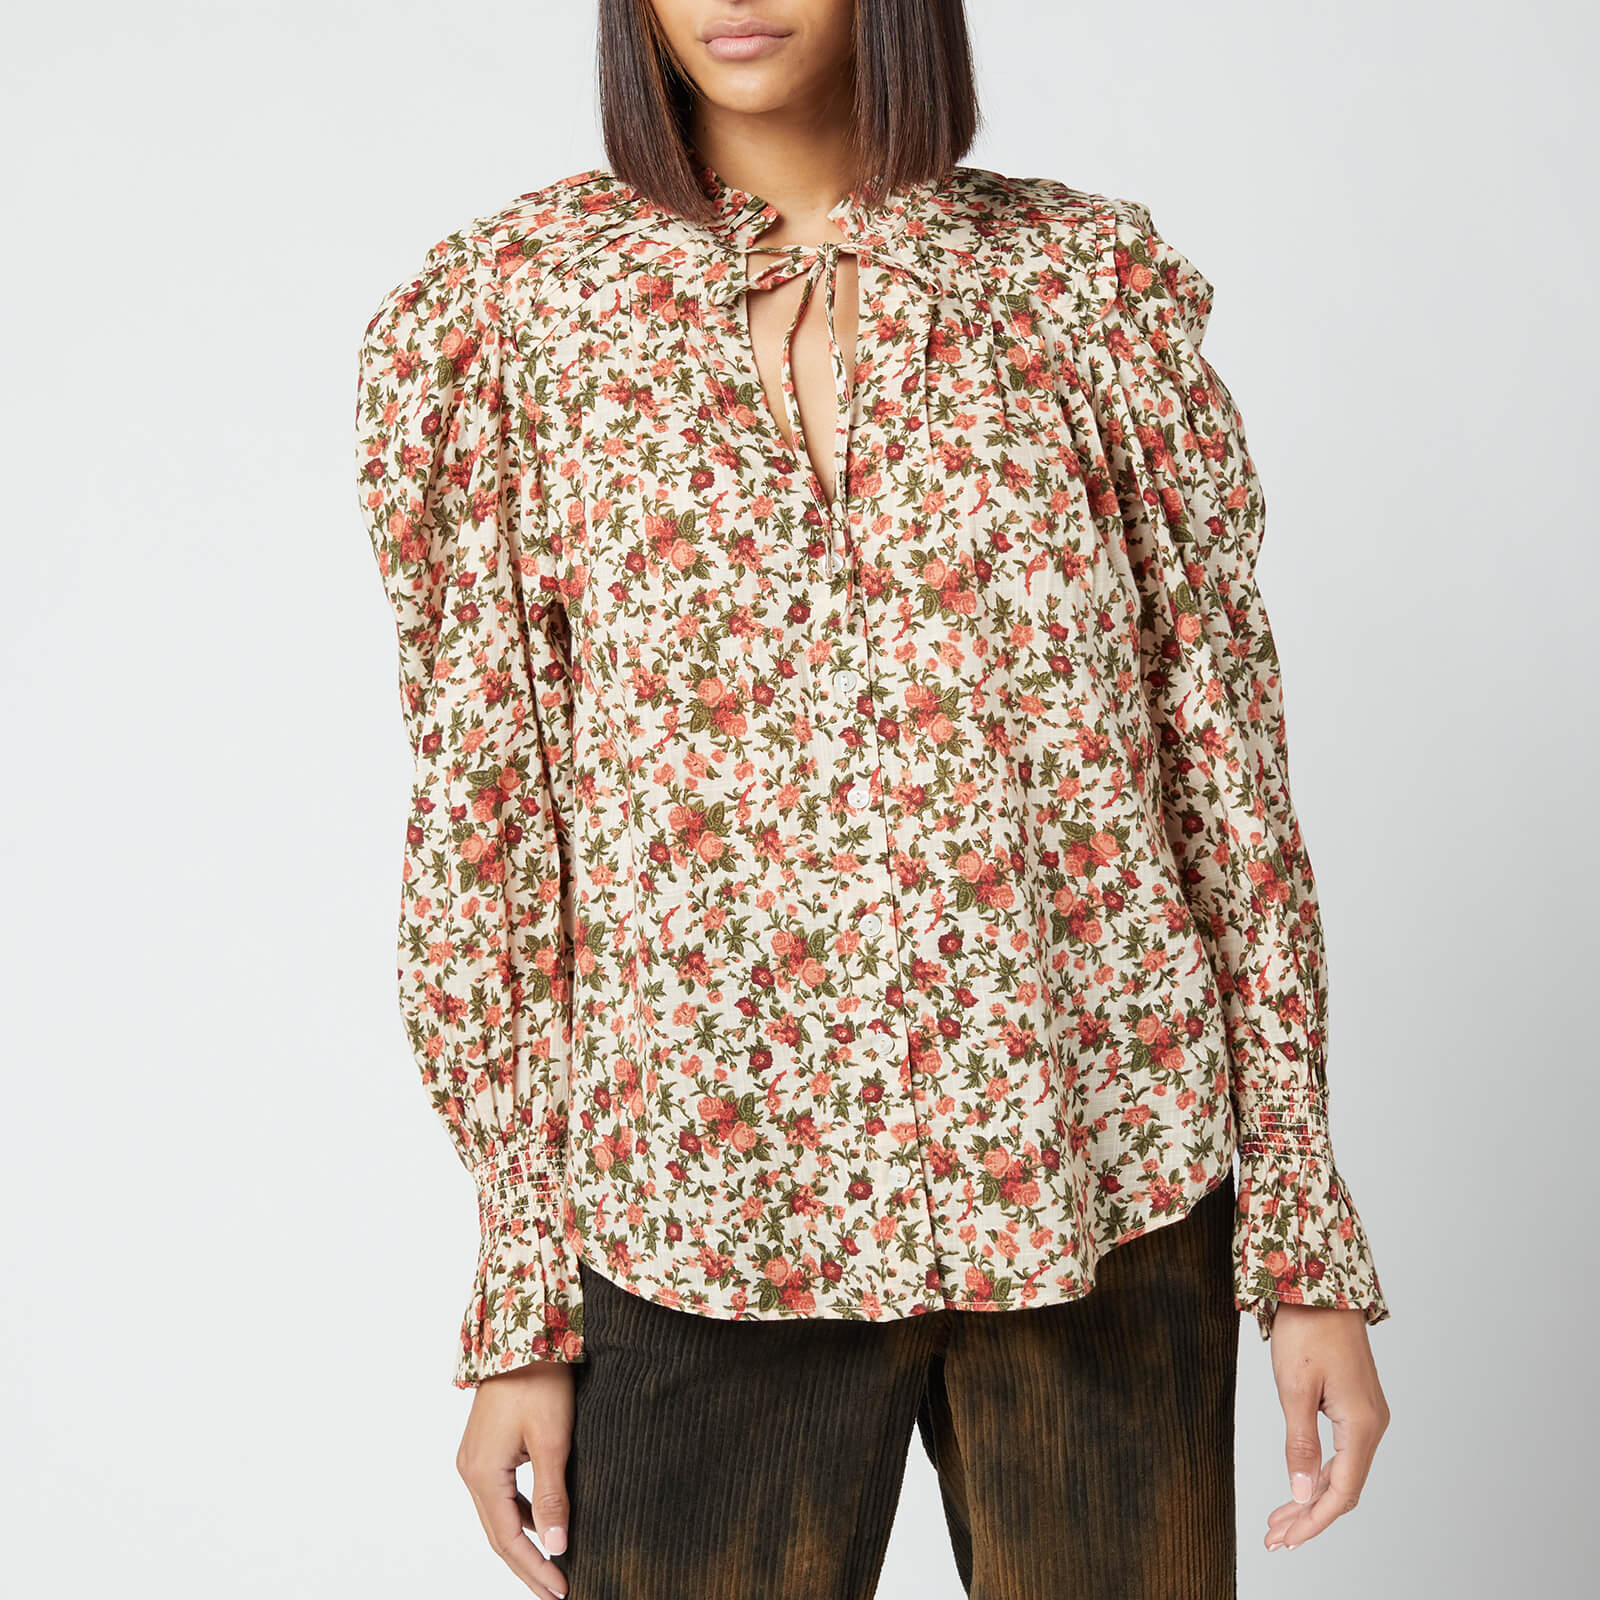 Free People Women's Meant To Be Blouse - Vintage Combo - XS